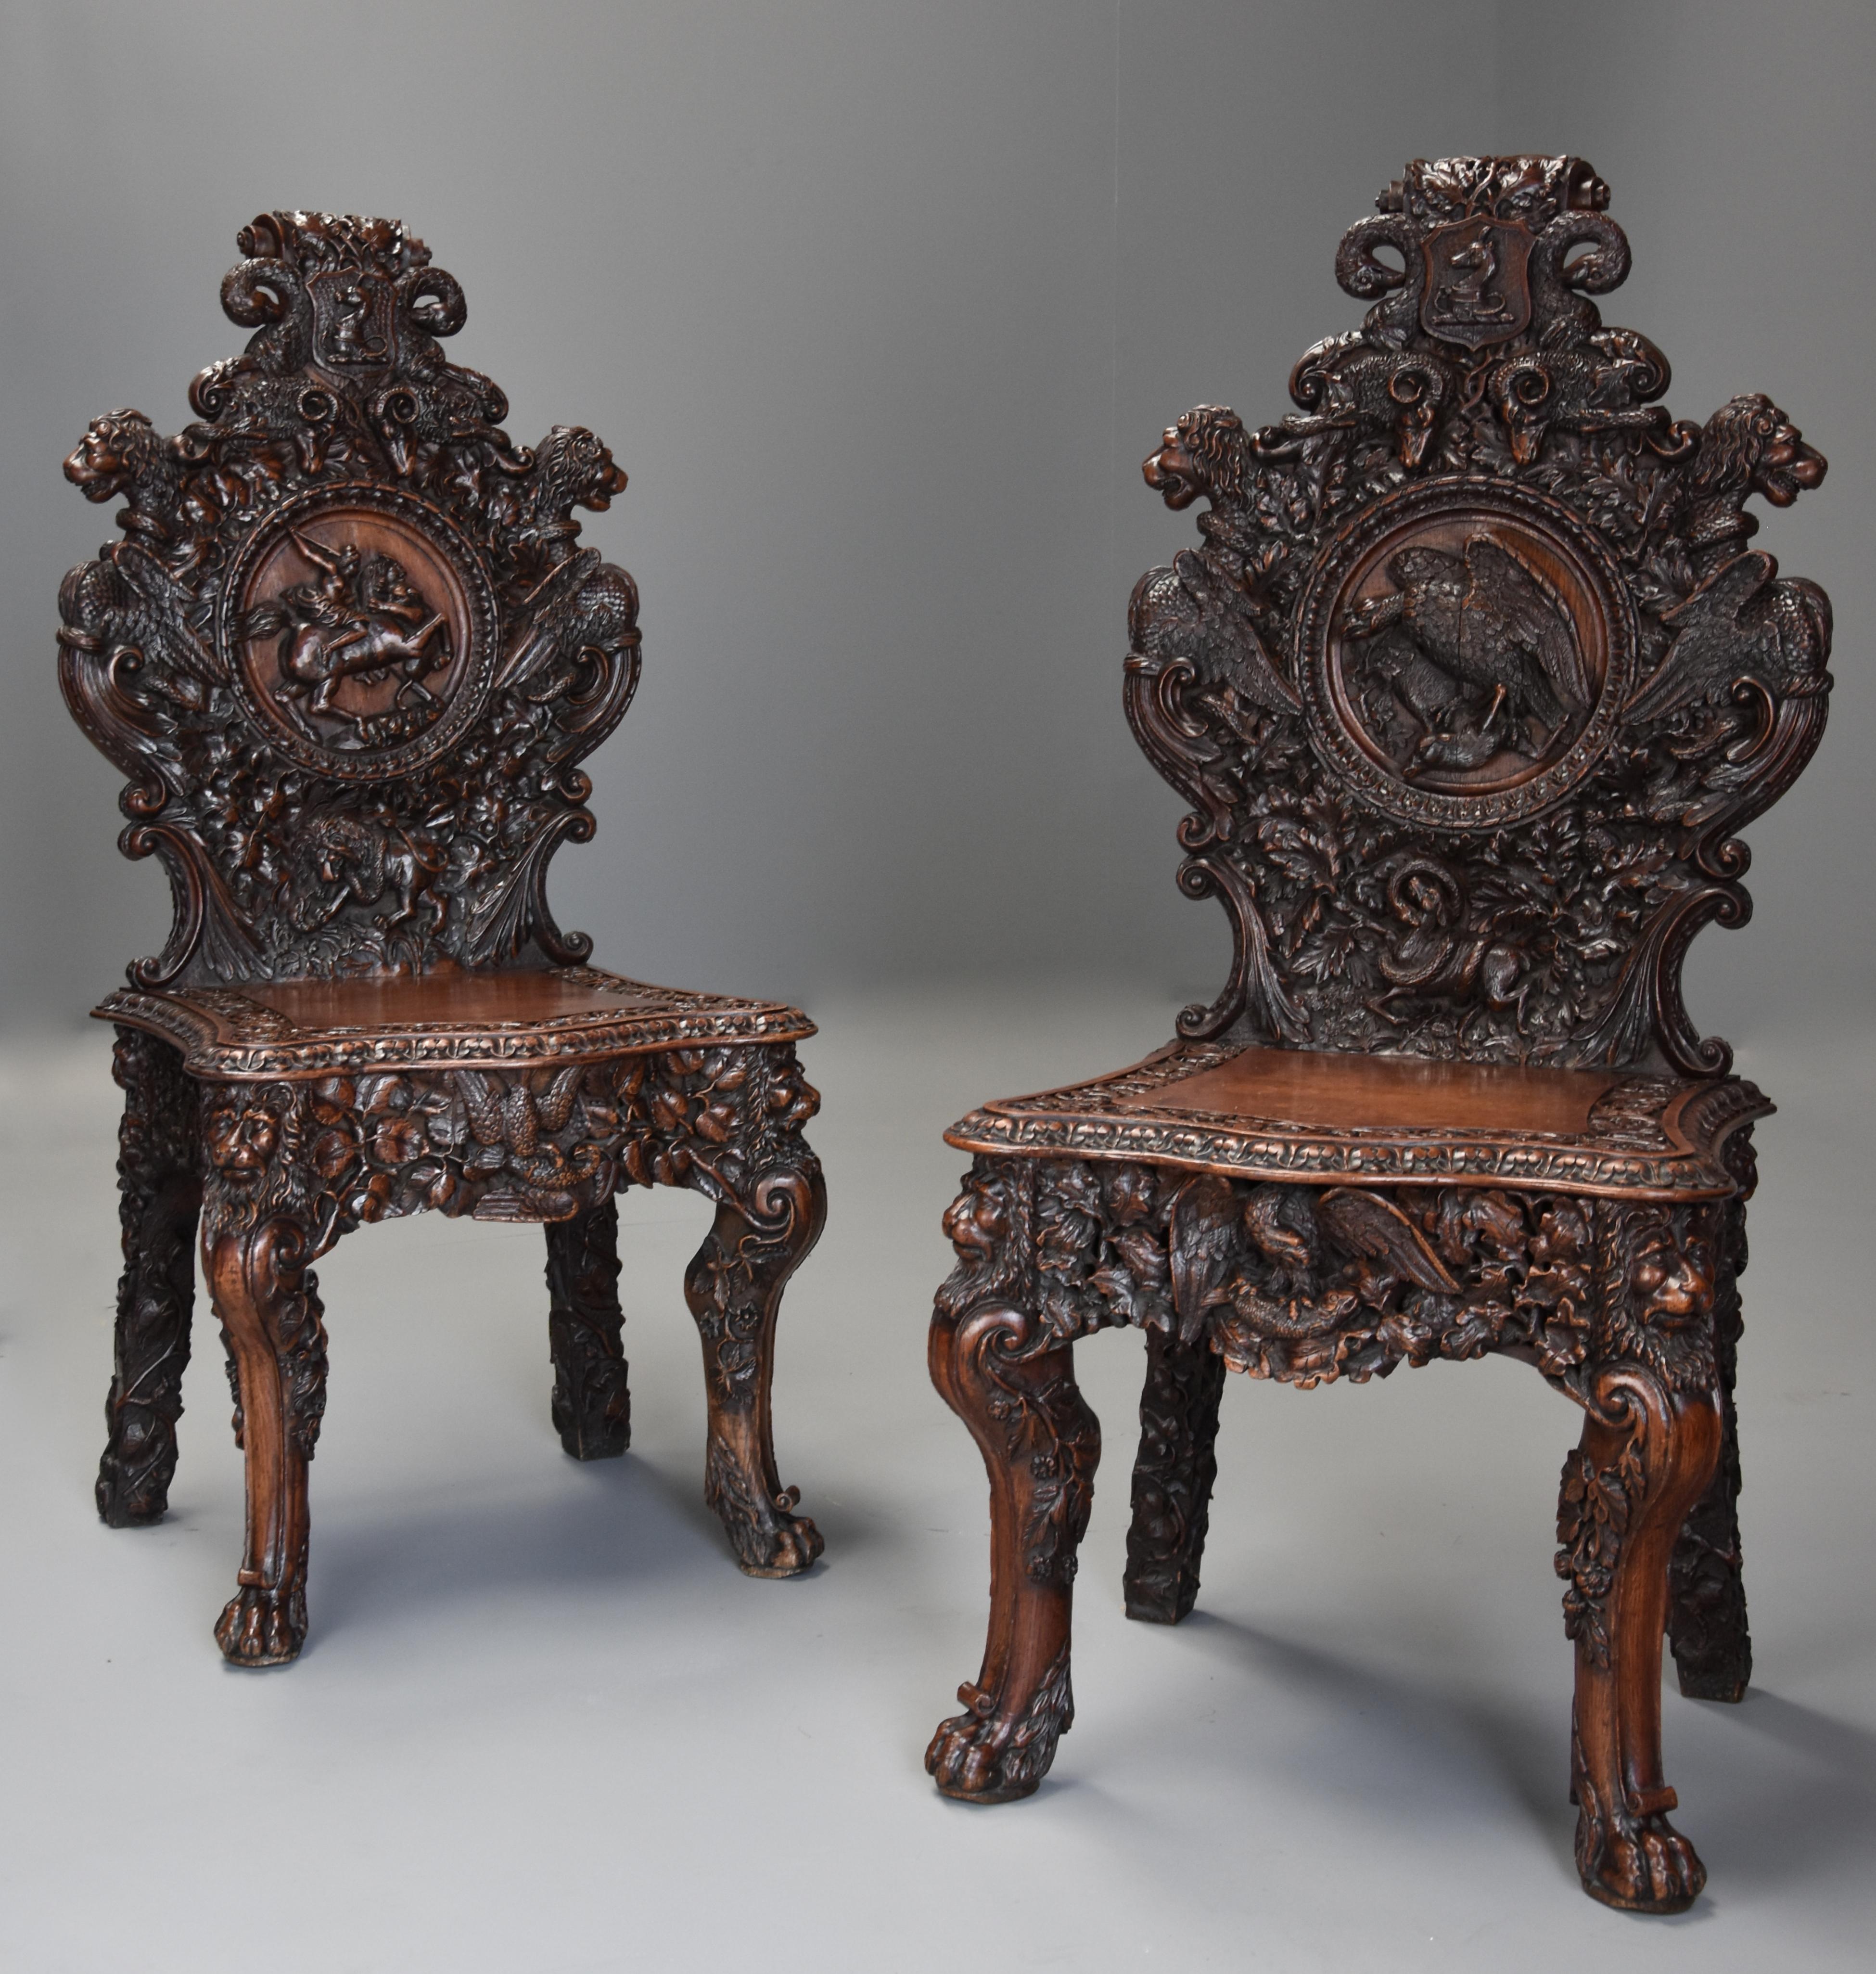 A superb pair of mid-19th century exhibition quality carved oak chairs of large proportion.

This pair of chairs consist of superbly and profusely carved backs with carved scrolling and foliate decoration to the top with carved armorial and carved